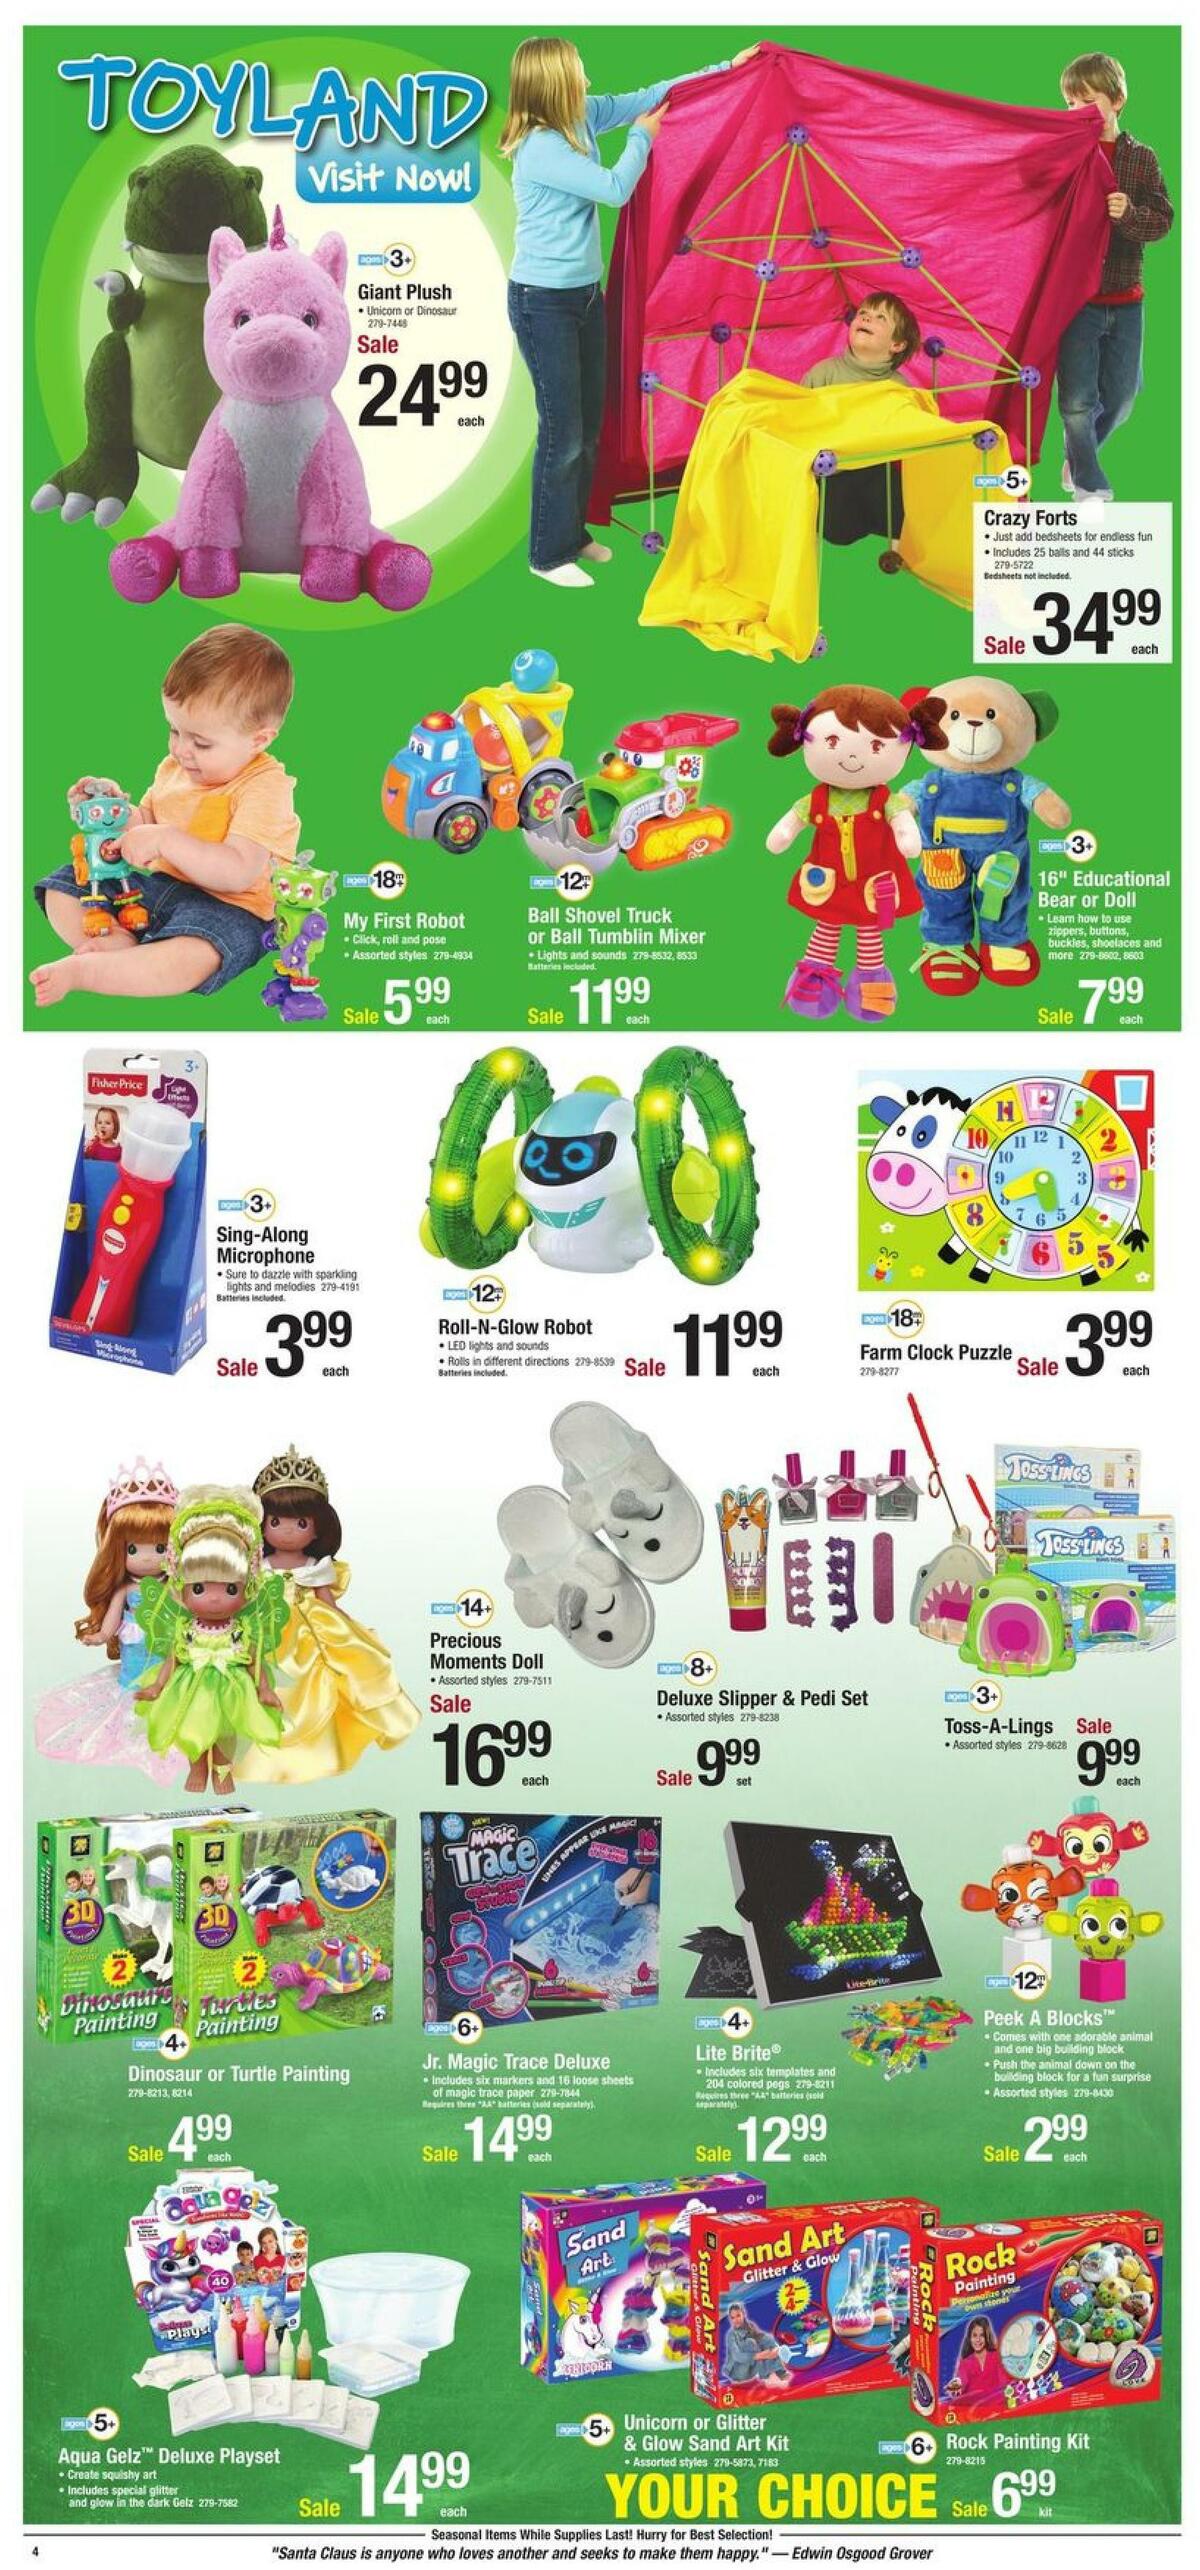 Menards Christmas Gifts & Decor Weekly Ad from December 3